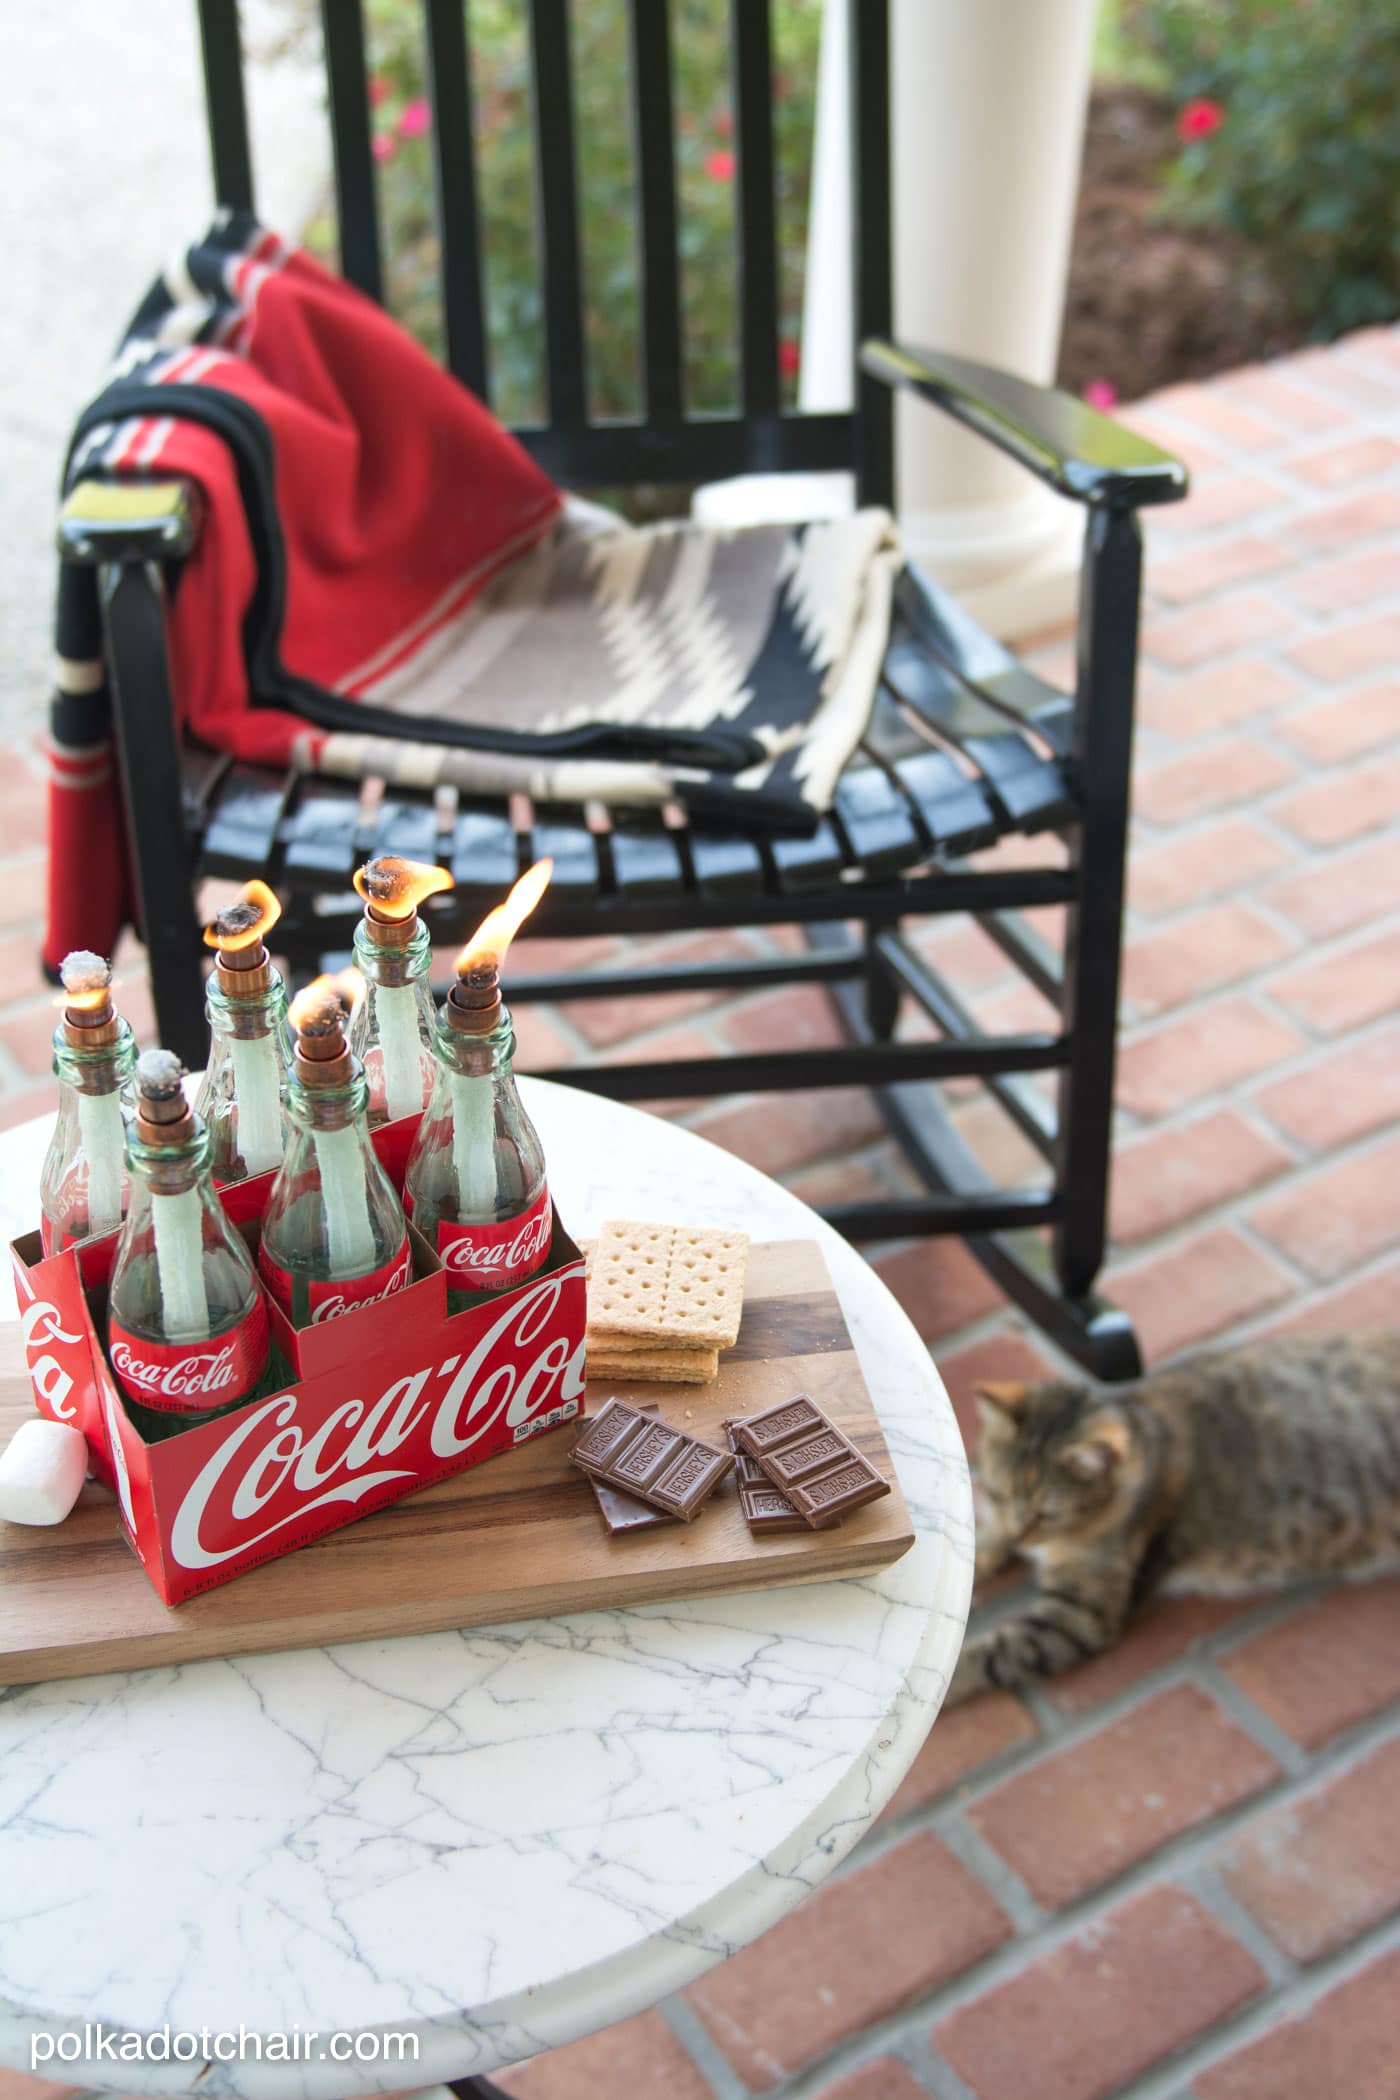 DIY tabletop s'mores maker made from upcycled Coca-Cola bottles